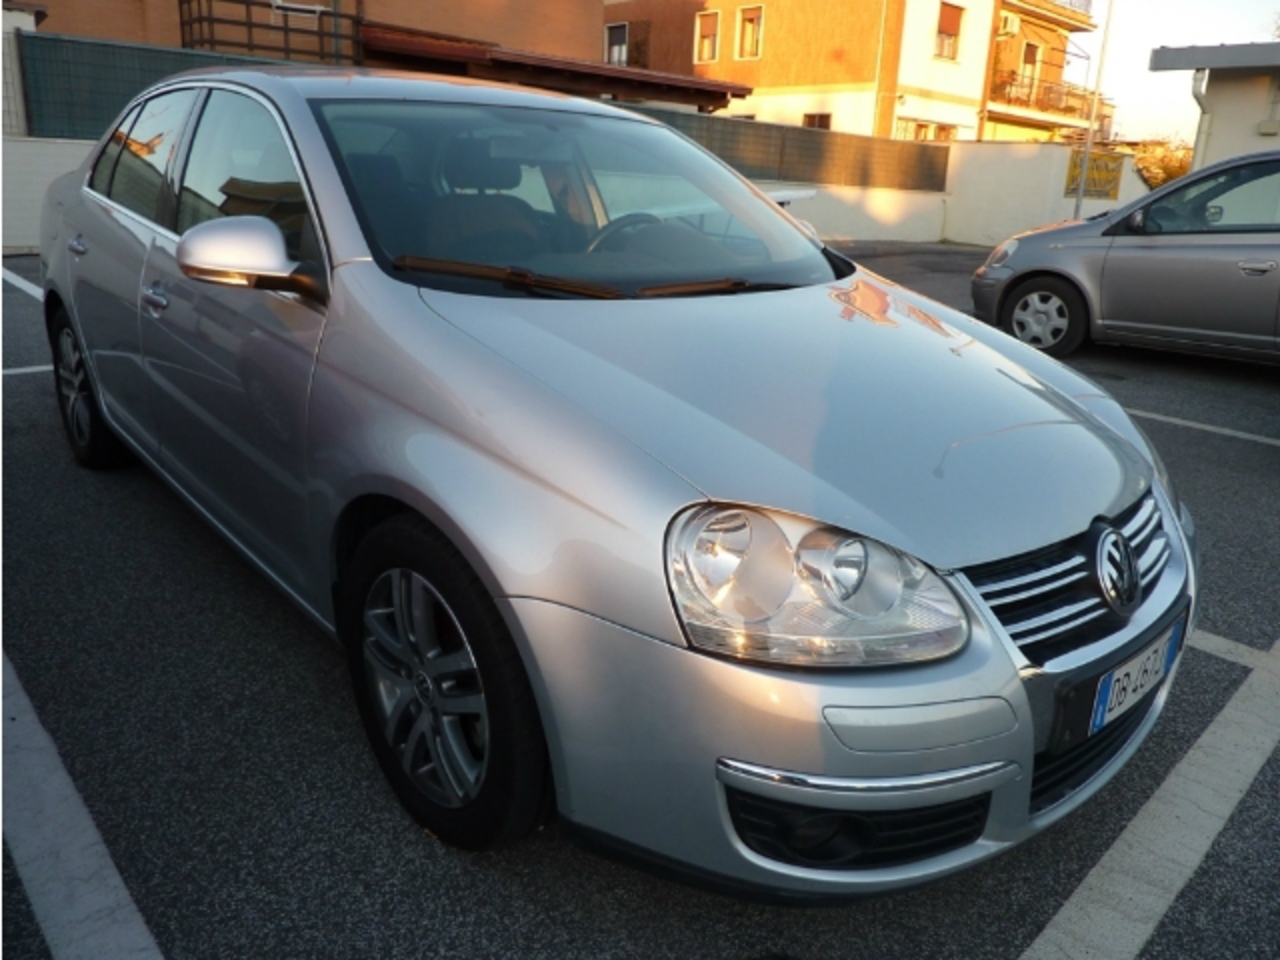 119,000 km. Italy Roma. Abs, Airbag, Alloy Wheels, Central Locking,